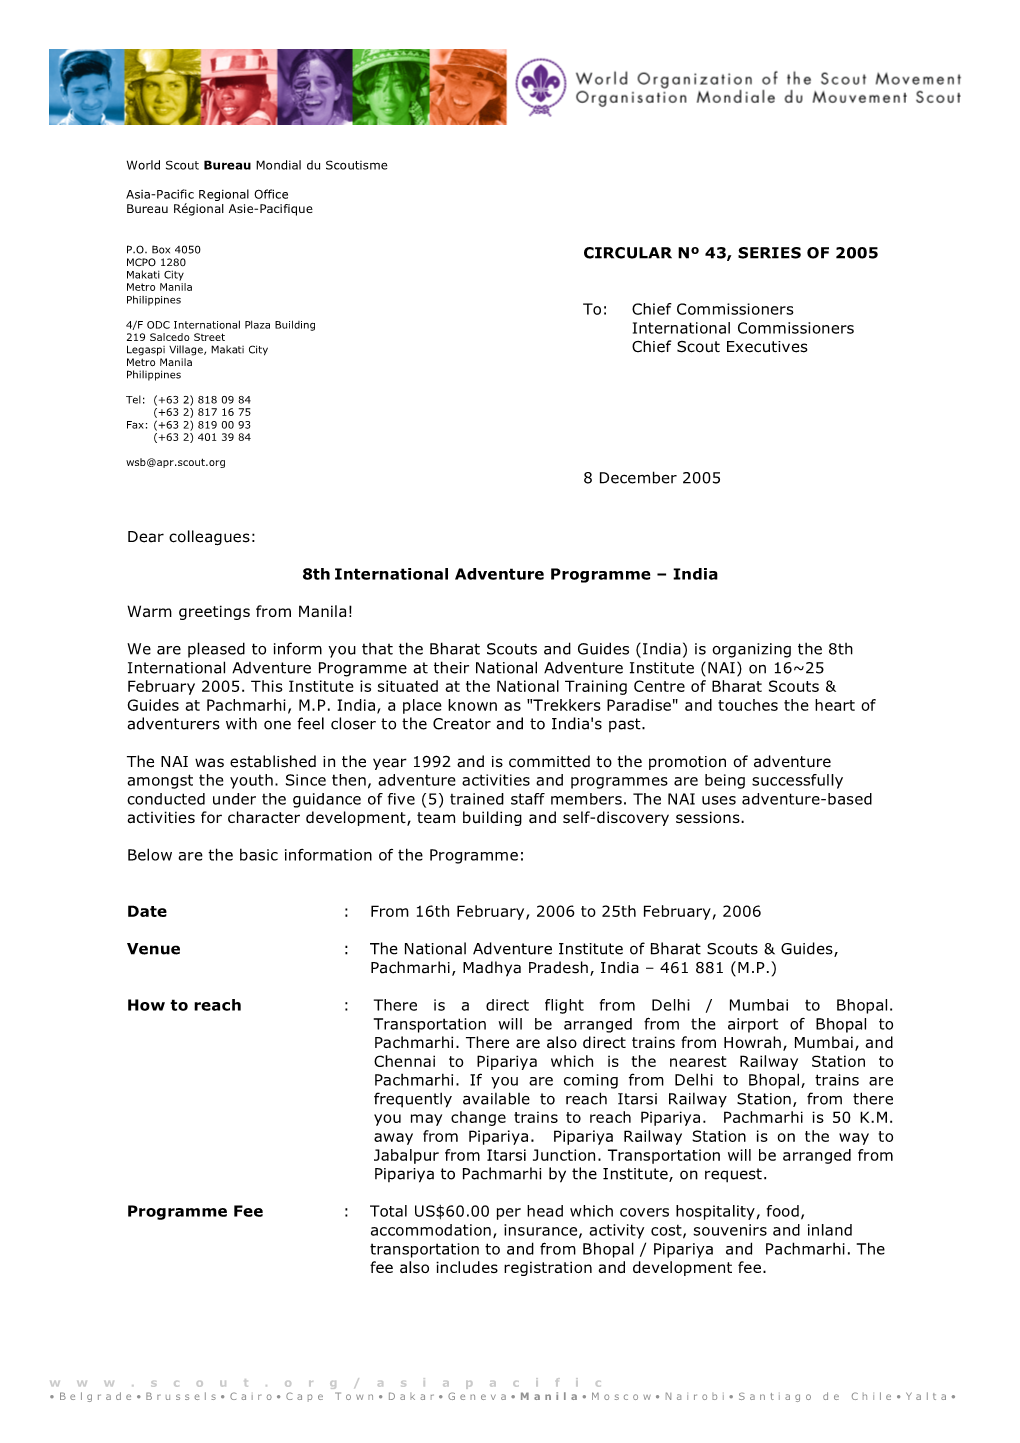 CIRCULAR Nº 43, SERIES of 2005 To: Chief Commissioners